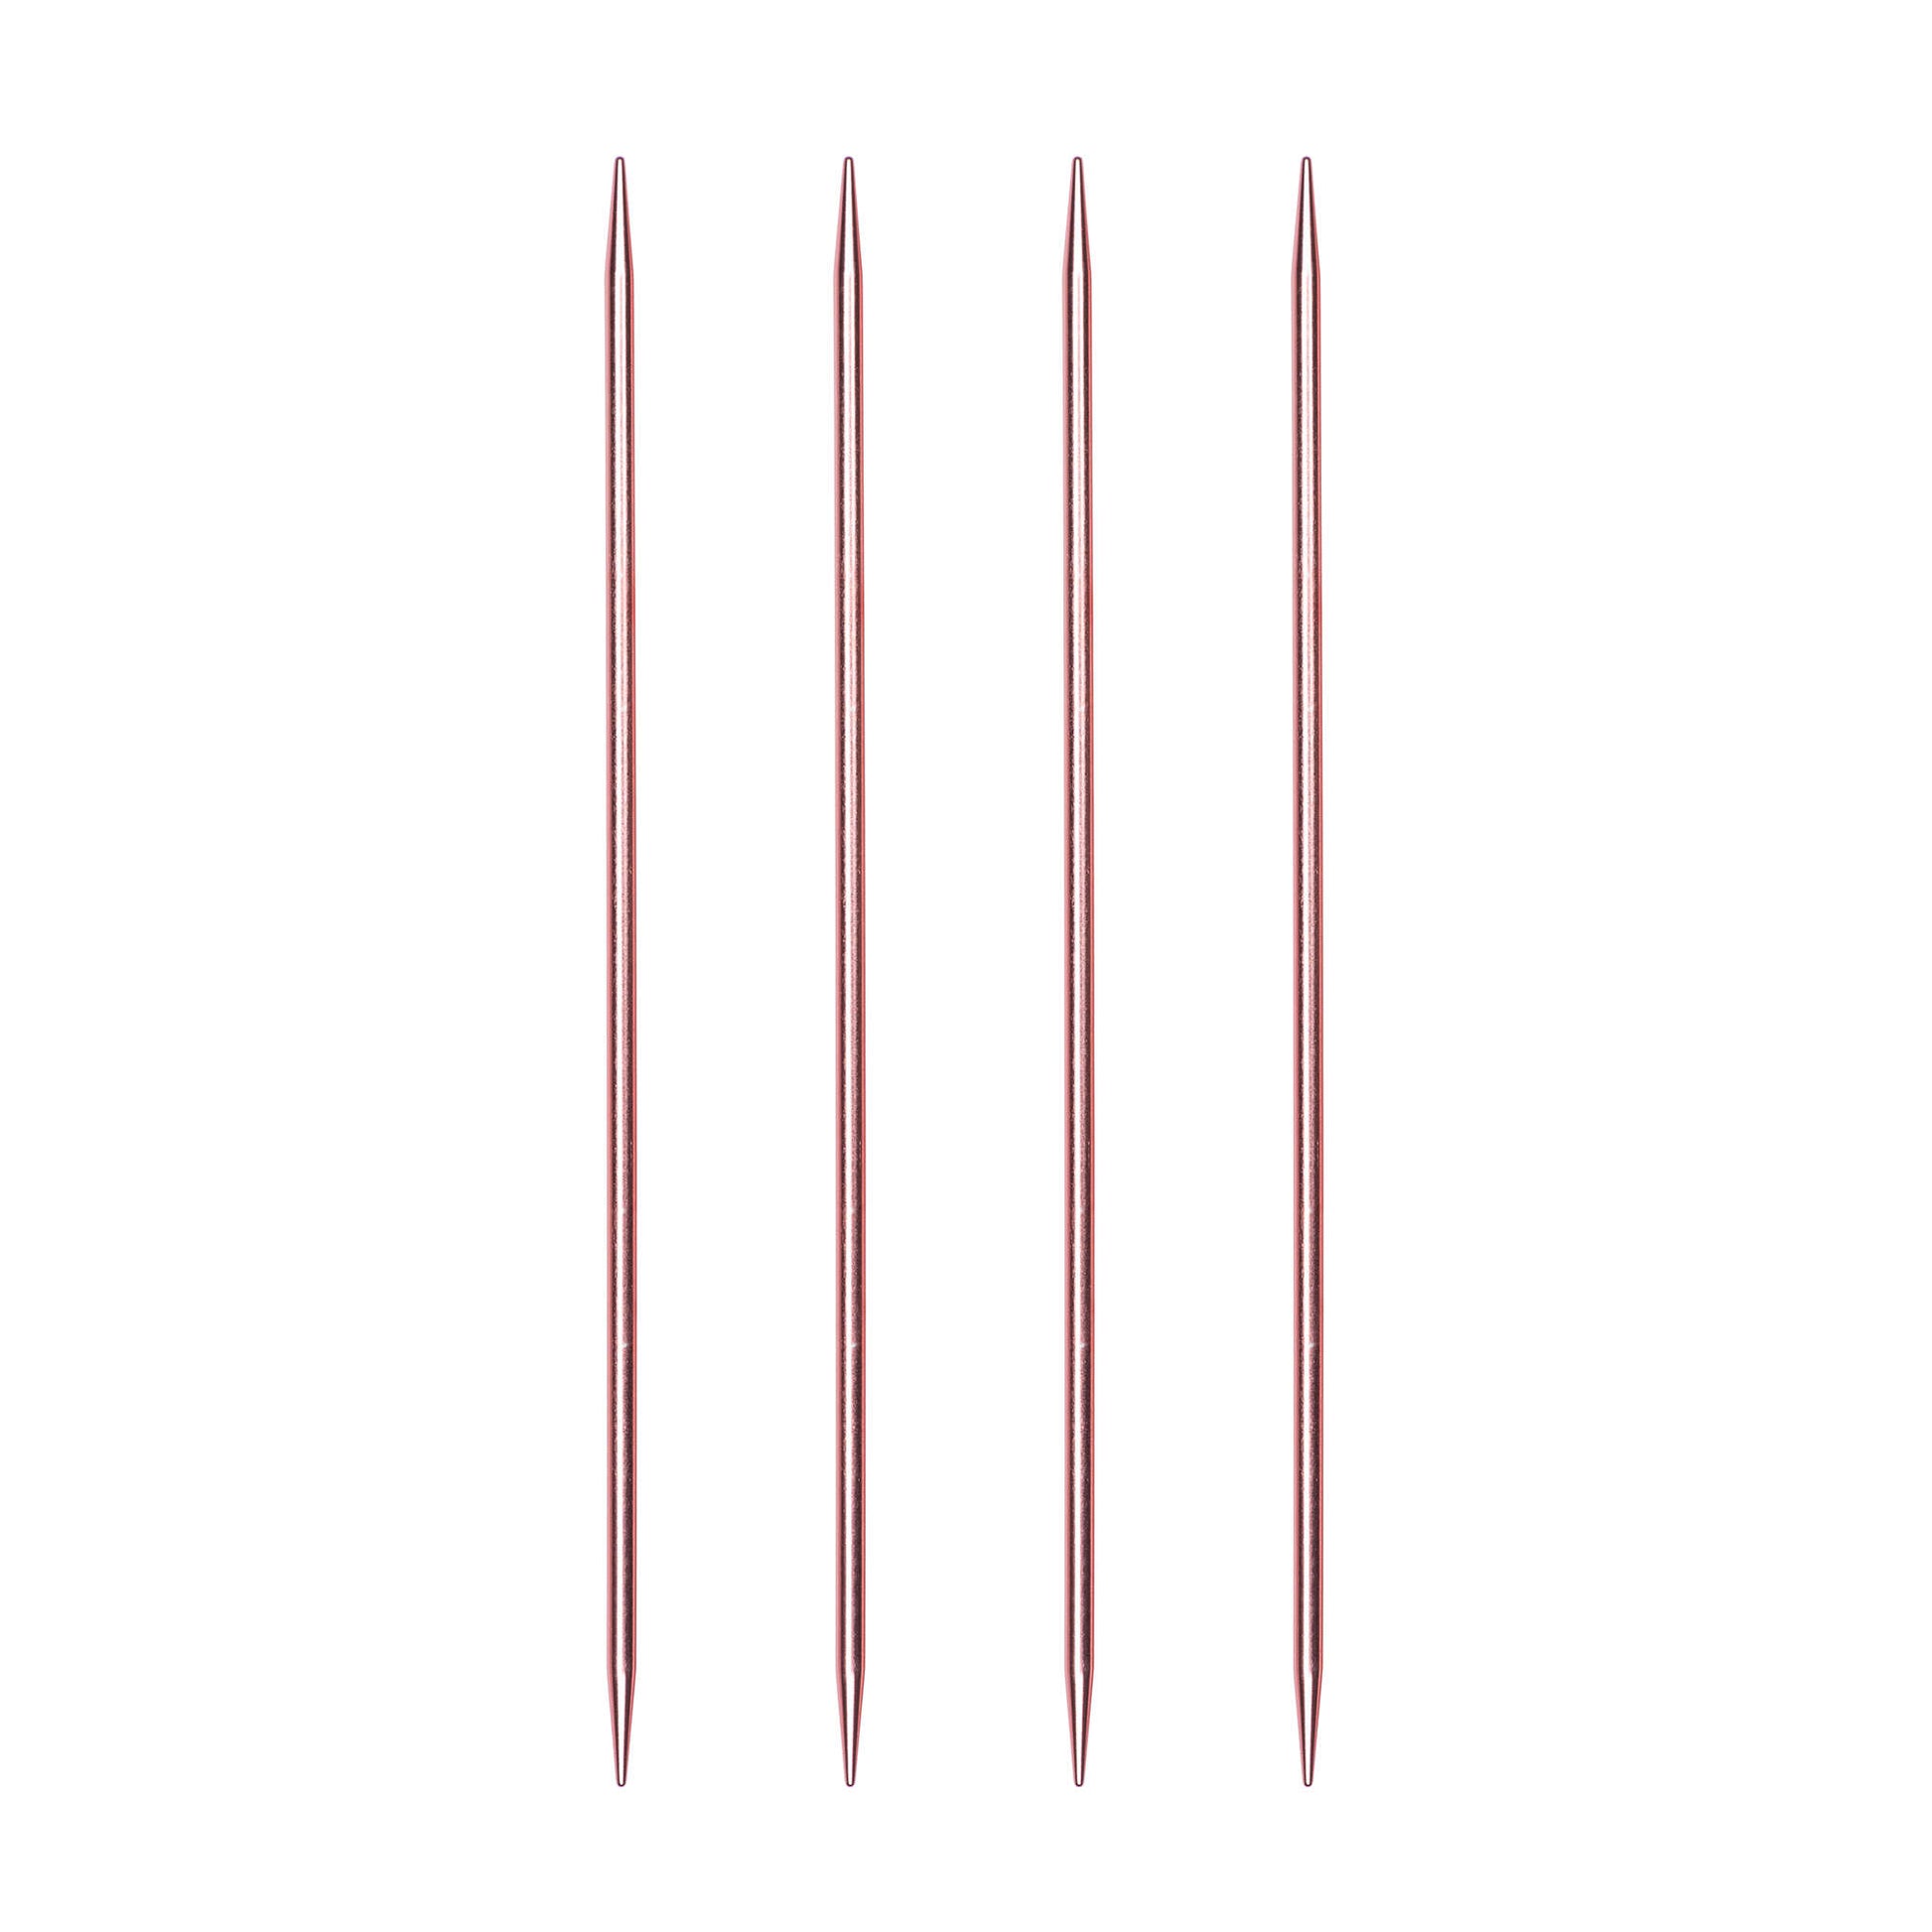 Susan Bates Silvalume 4 Pack, Double Point Knitting Needles U.S. 4 (3.5 mm)